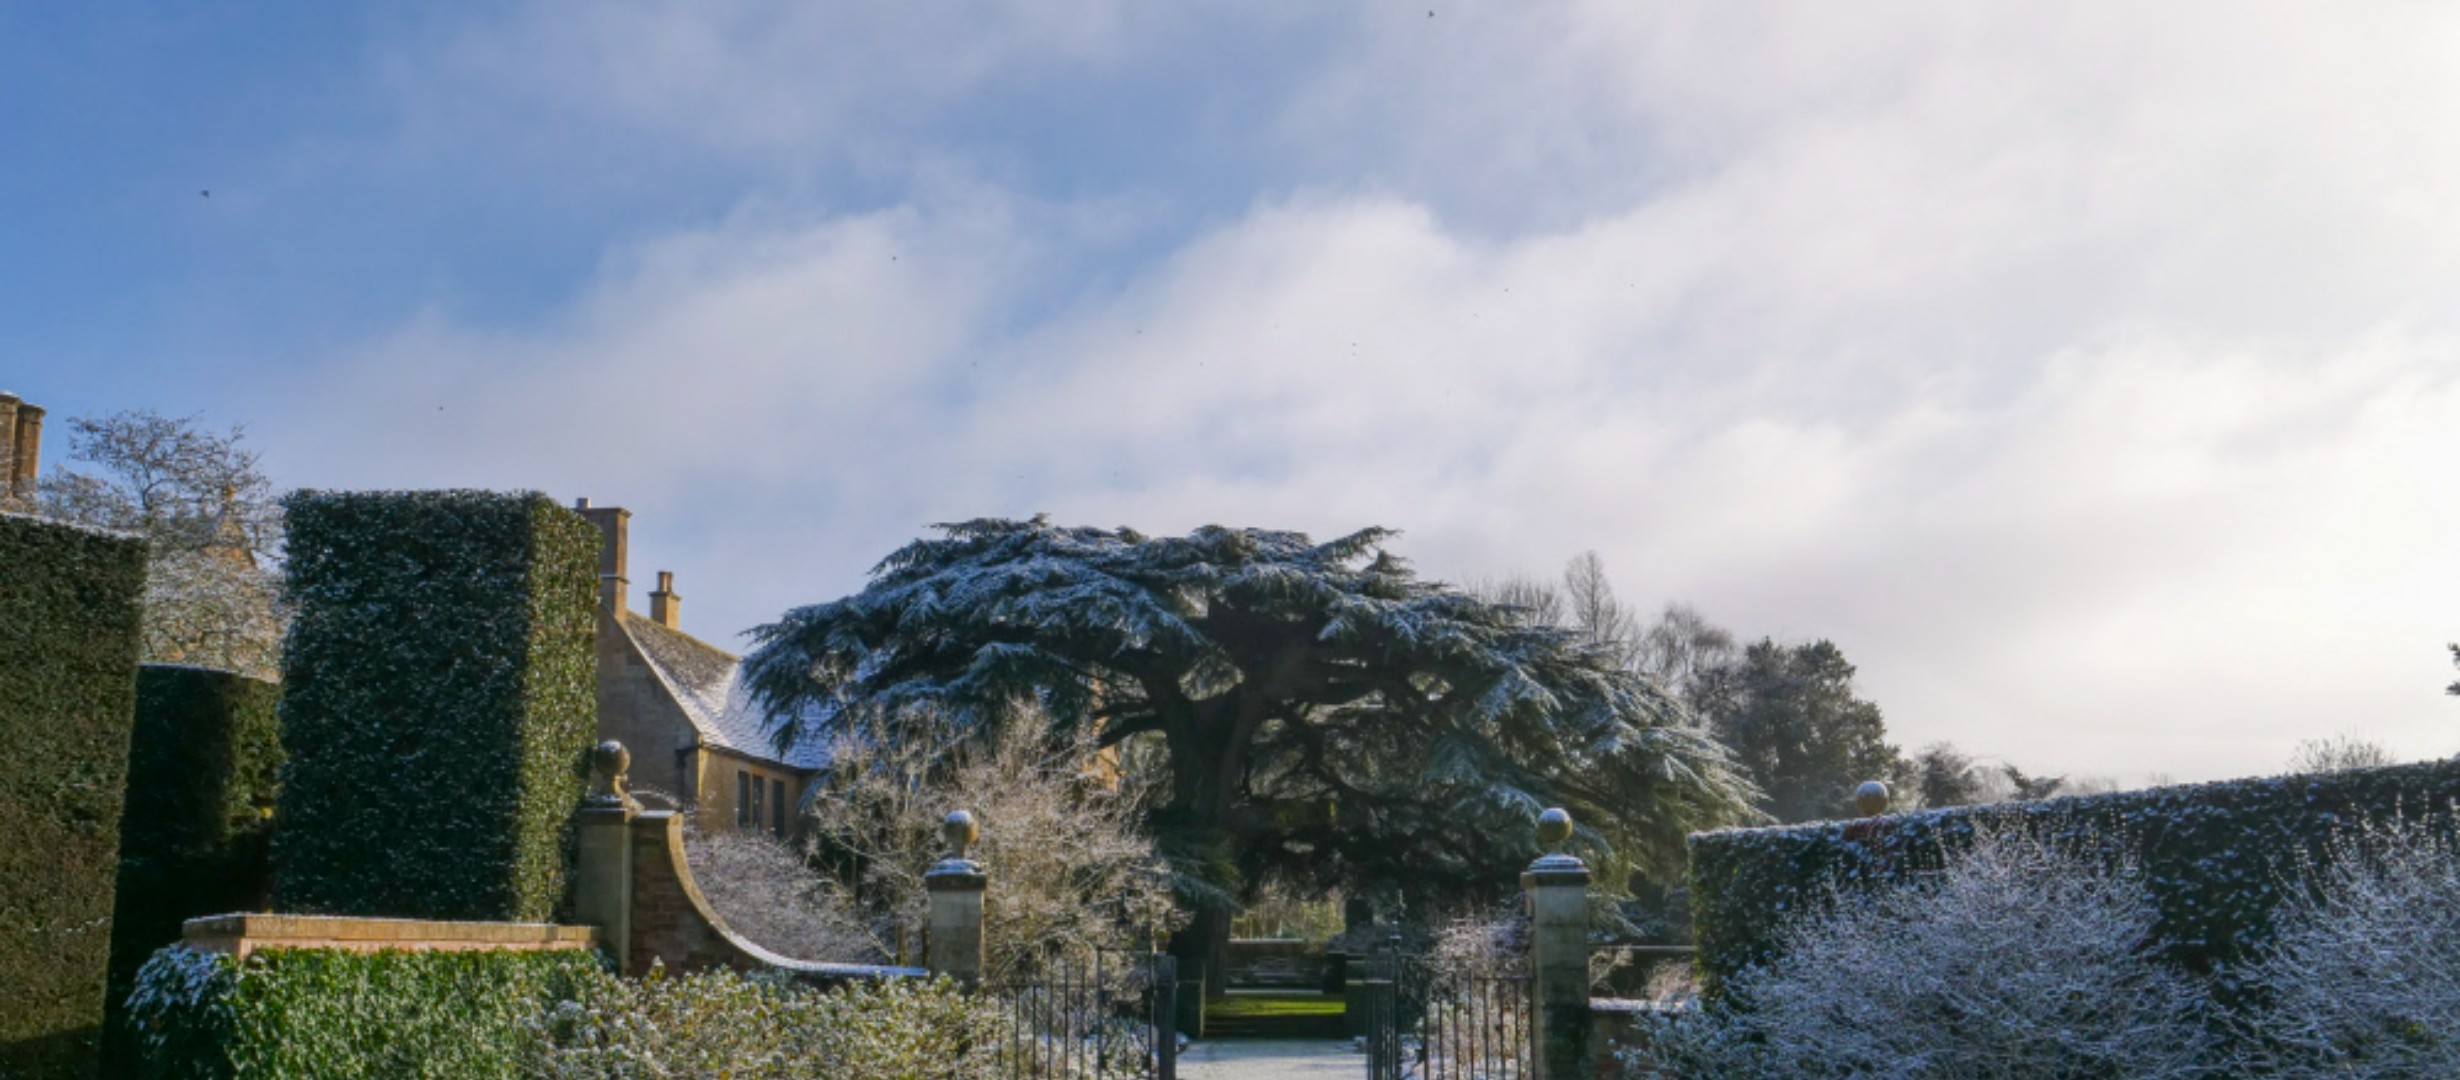 The Old Garden in Winter at Hidcote